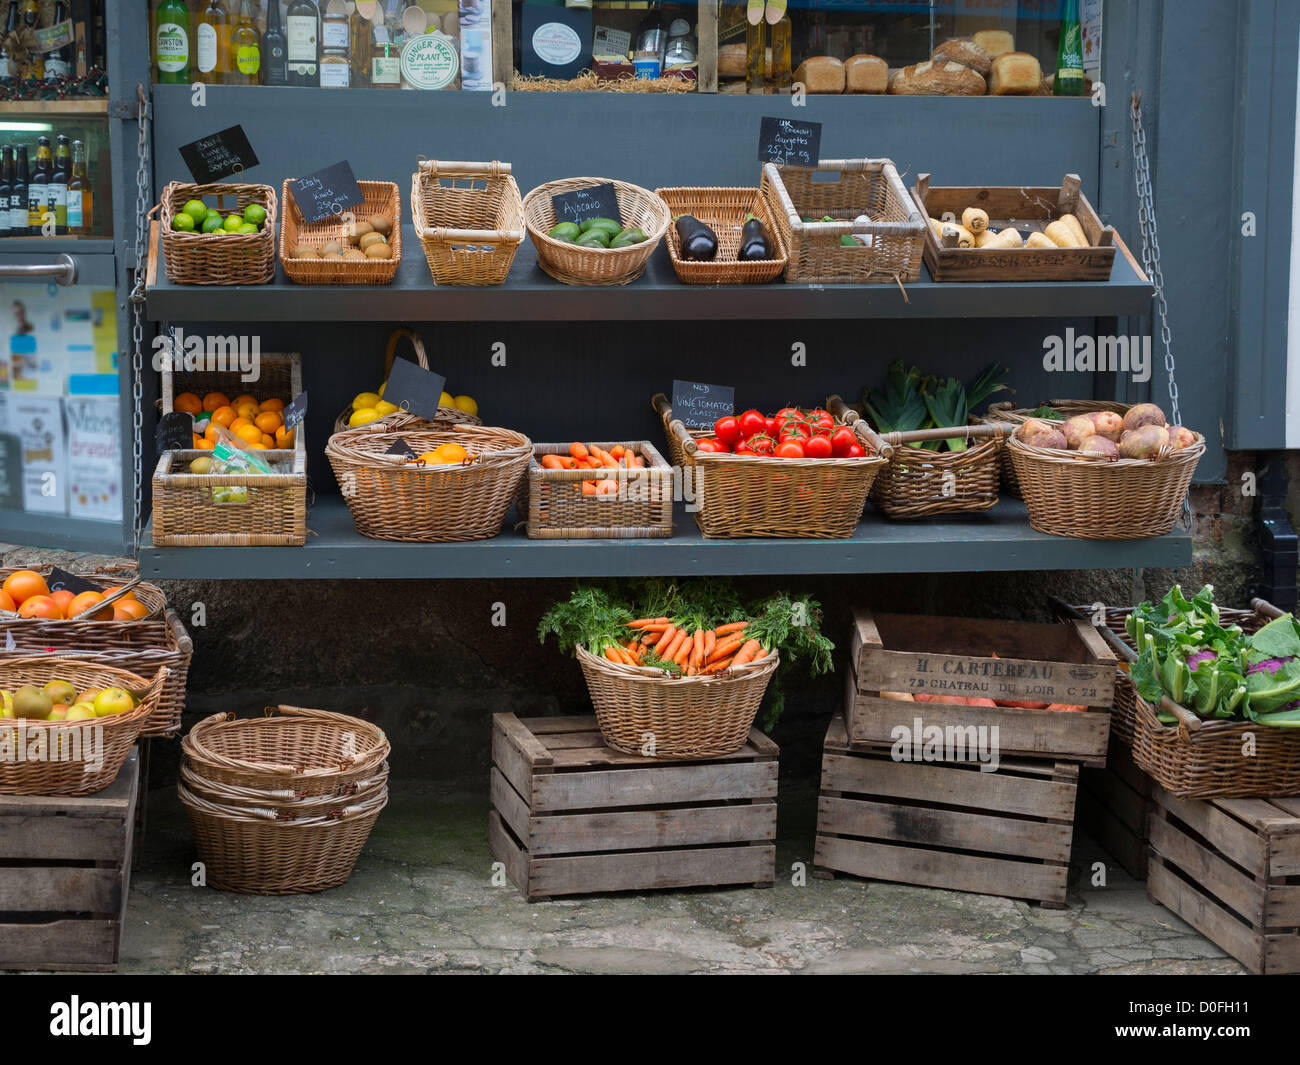 Fruttivendolo display in St Ives, Cornwall Foto Stock